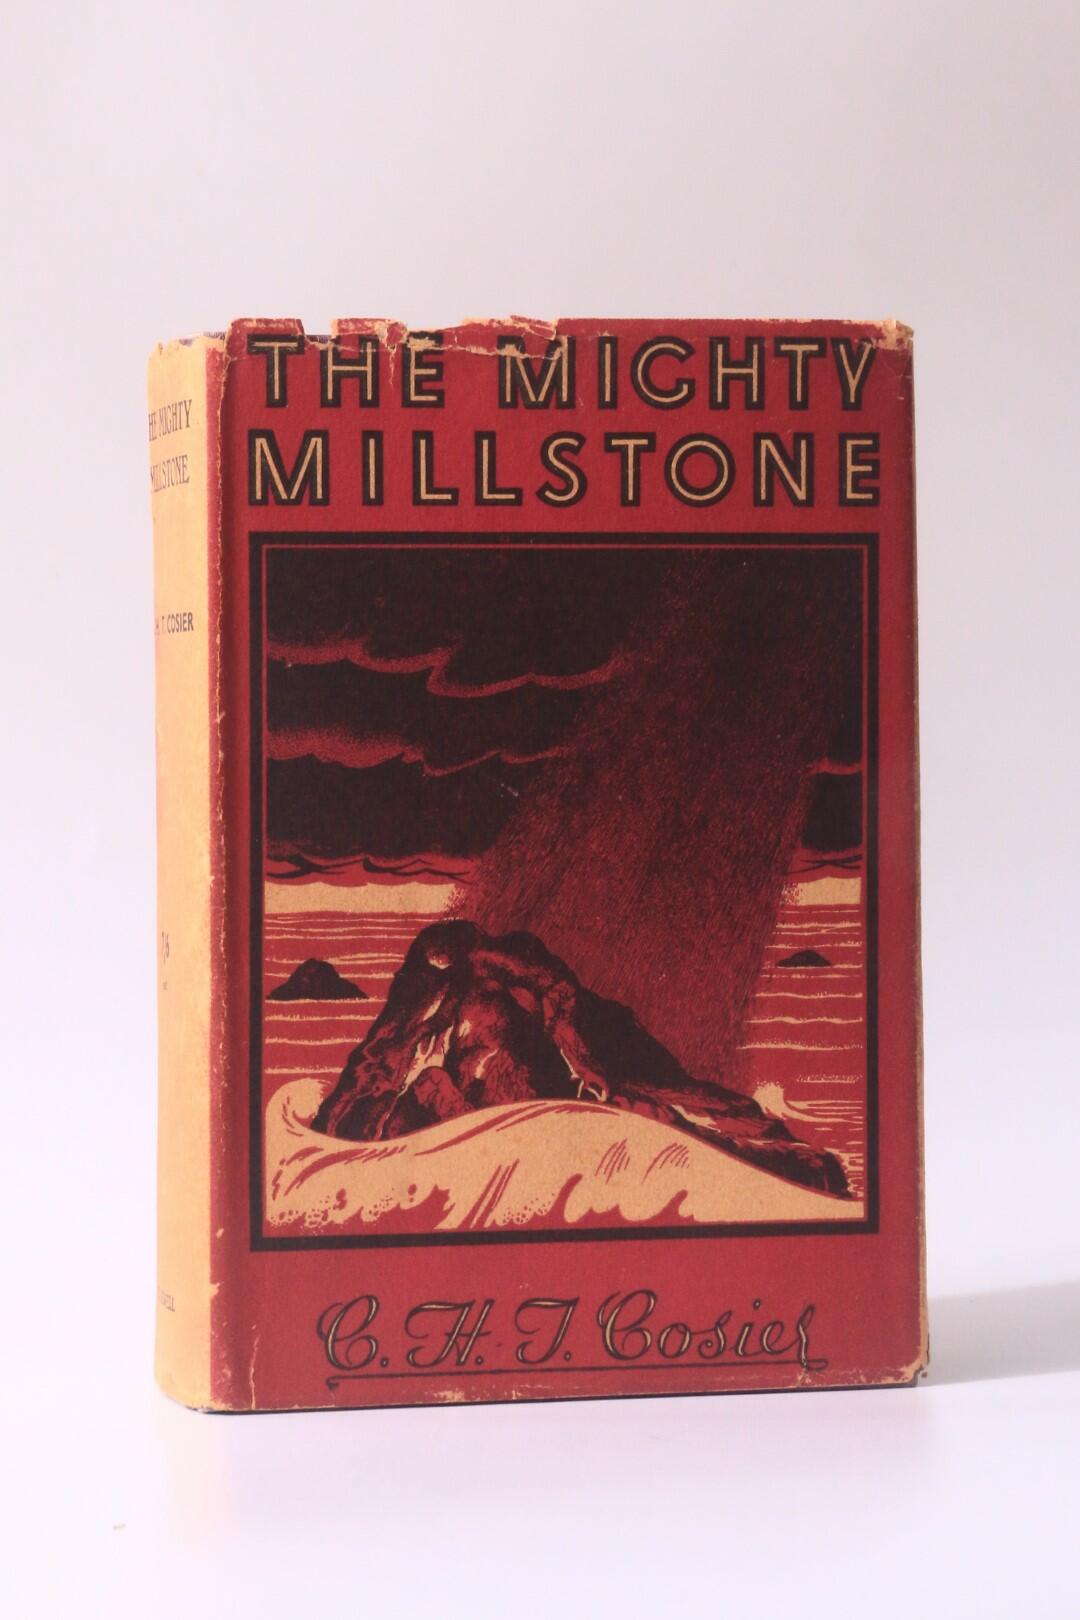 C.H.T. Cosier - The Mighty Millstone - Arthur H. Stockwell, nd [1938], Signed First Edition.